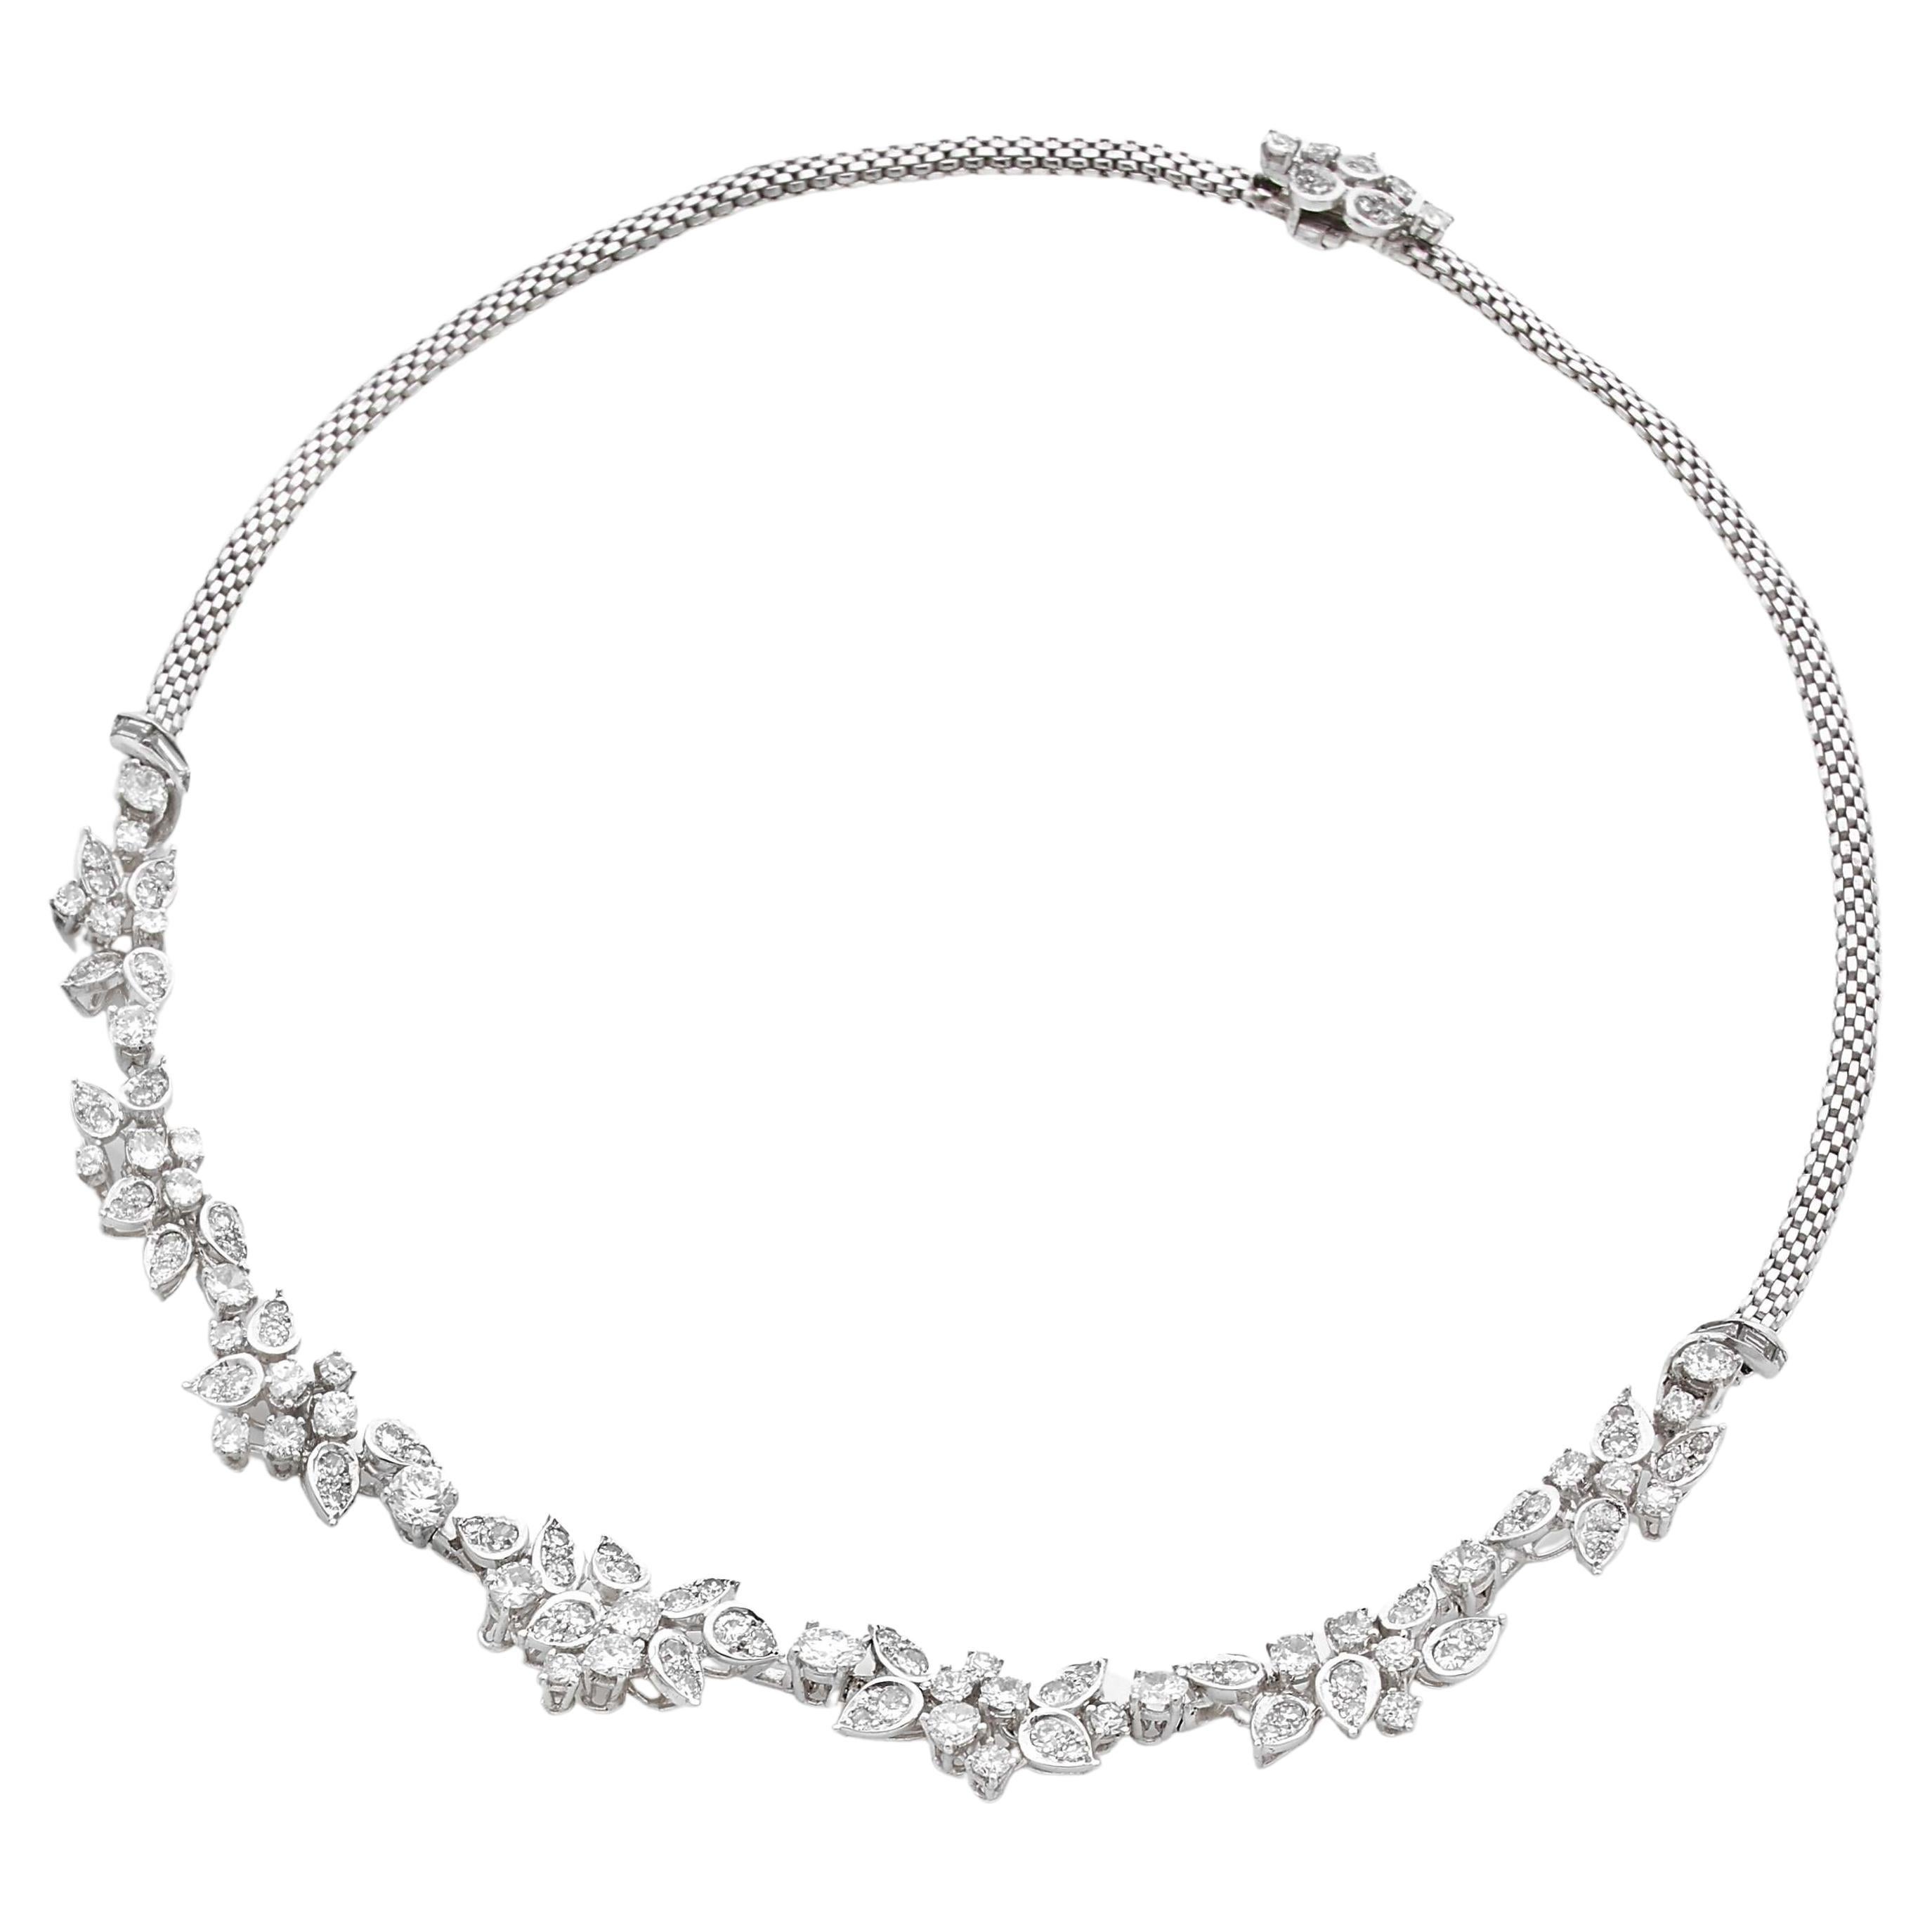 Boucheron Necklace in 18K white gold and platinum with a floral motif displaying brilliant cut as well as baguette cut diamonds.

Approx weight of diamonds: 9 carats

Signed Boucheron Monture

With original box